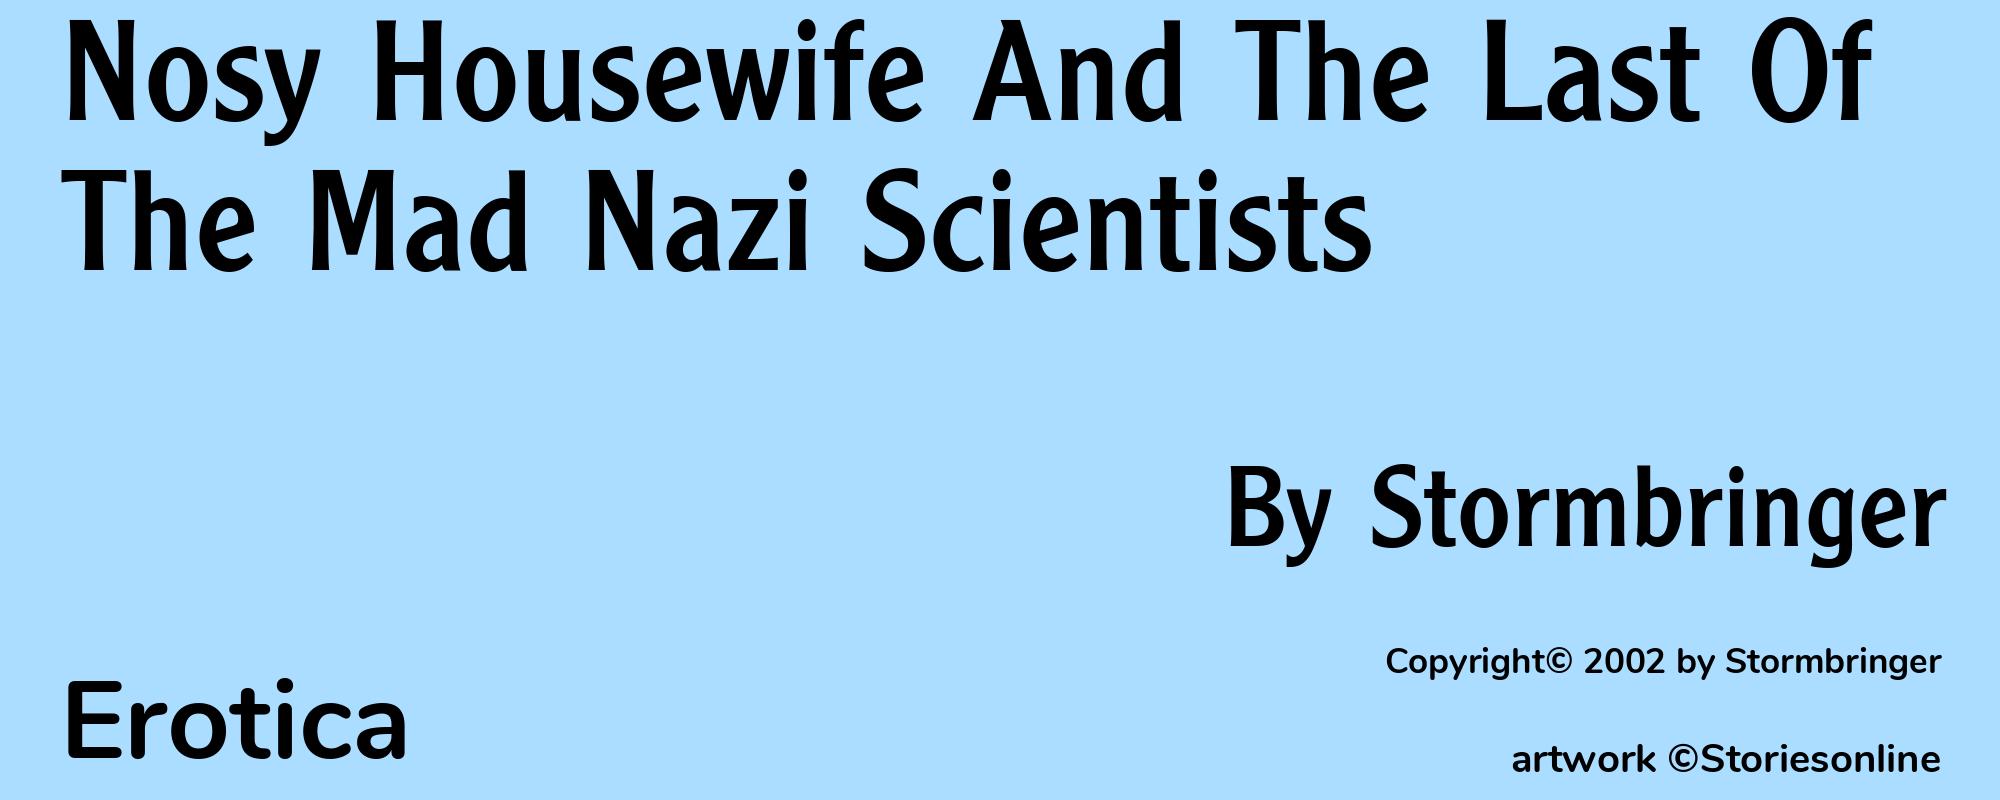 Nosy Housewife And The Last Of The Mad Nazi Scientists - Cover